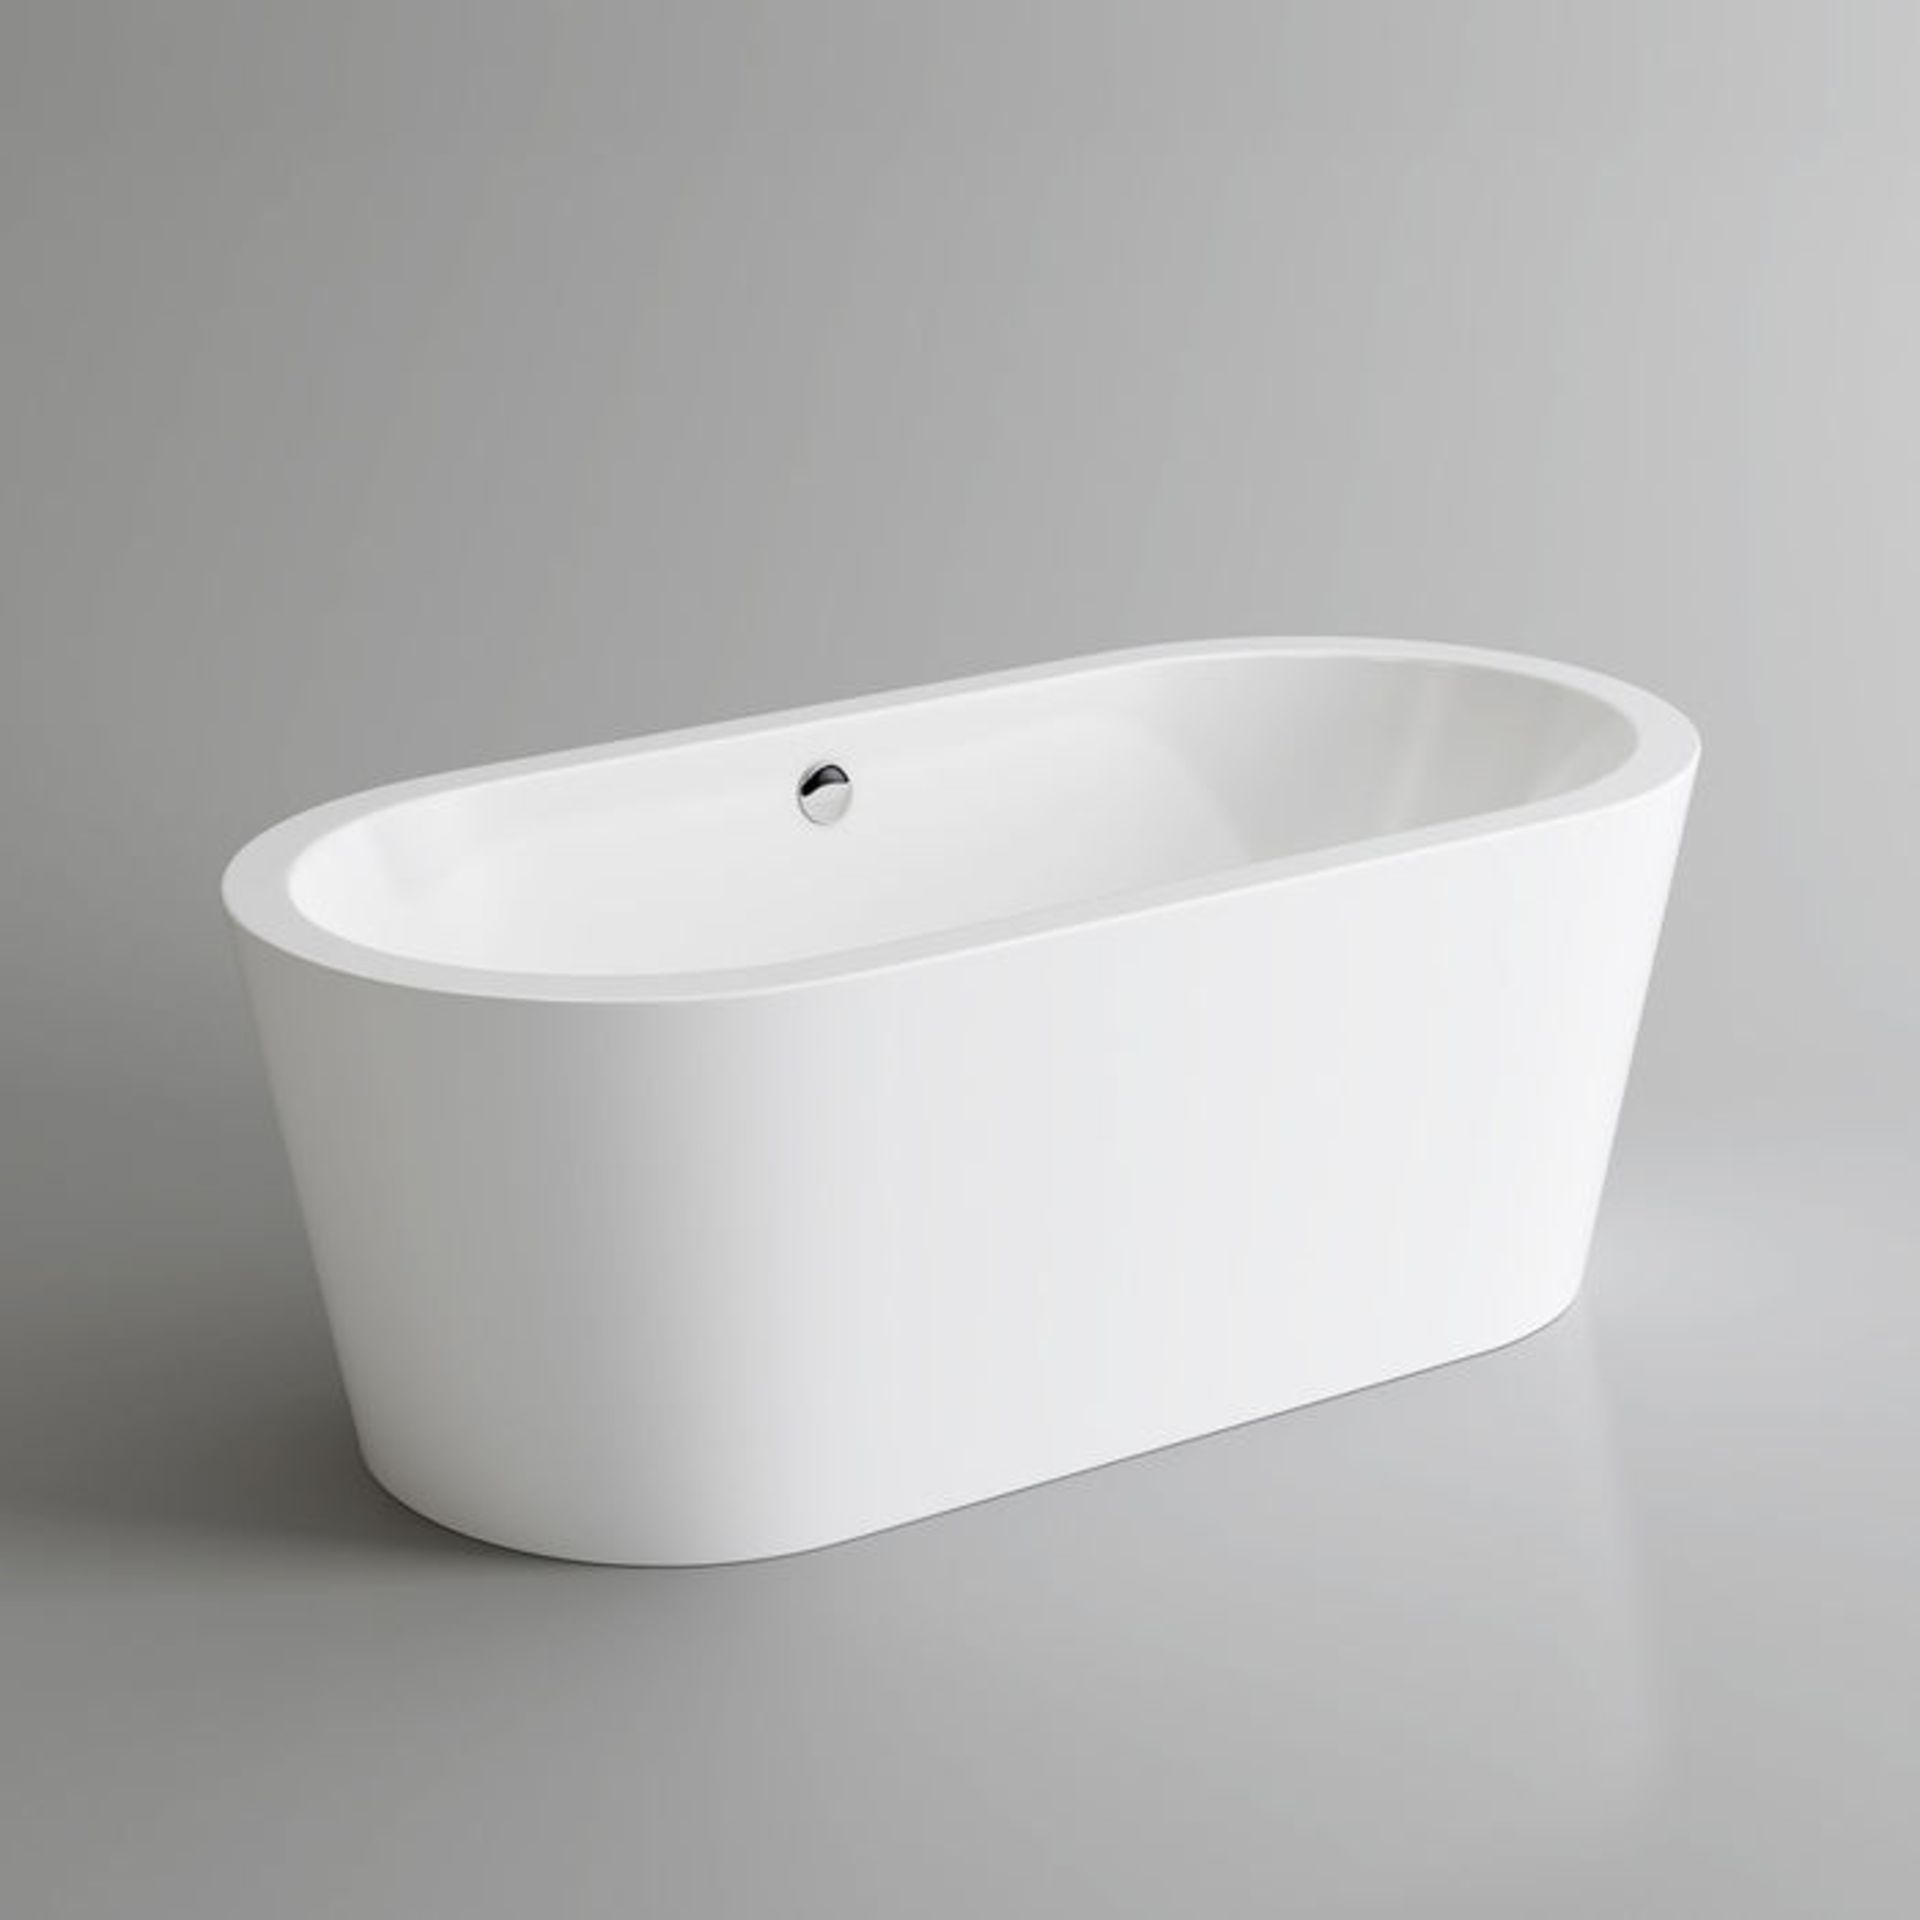 (GR176) 1700X800mm Isla Freestanding Bath. Manufactured from High Quality Acrylic, complimented by a - Image 5 of 5